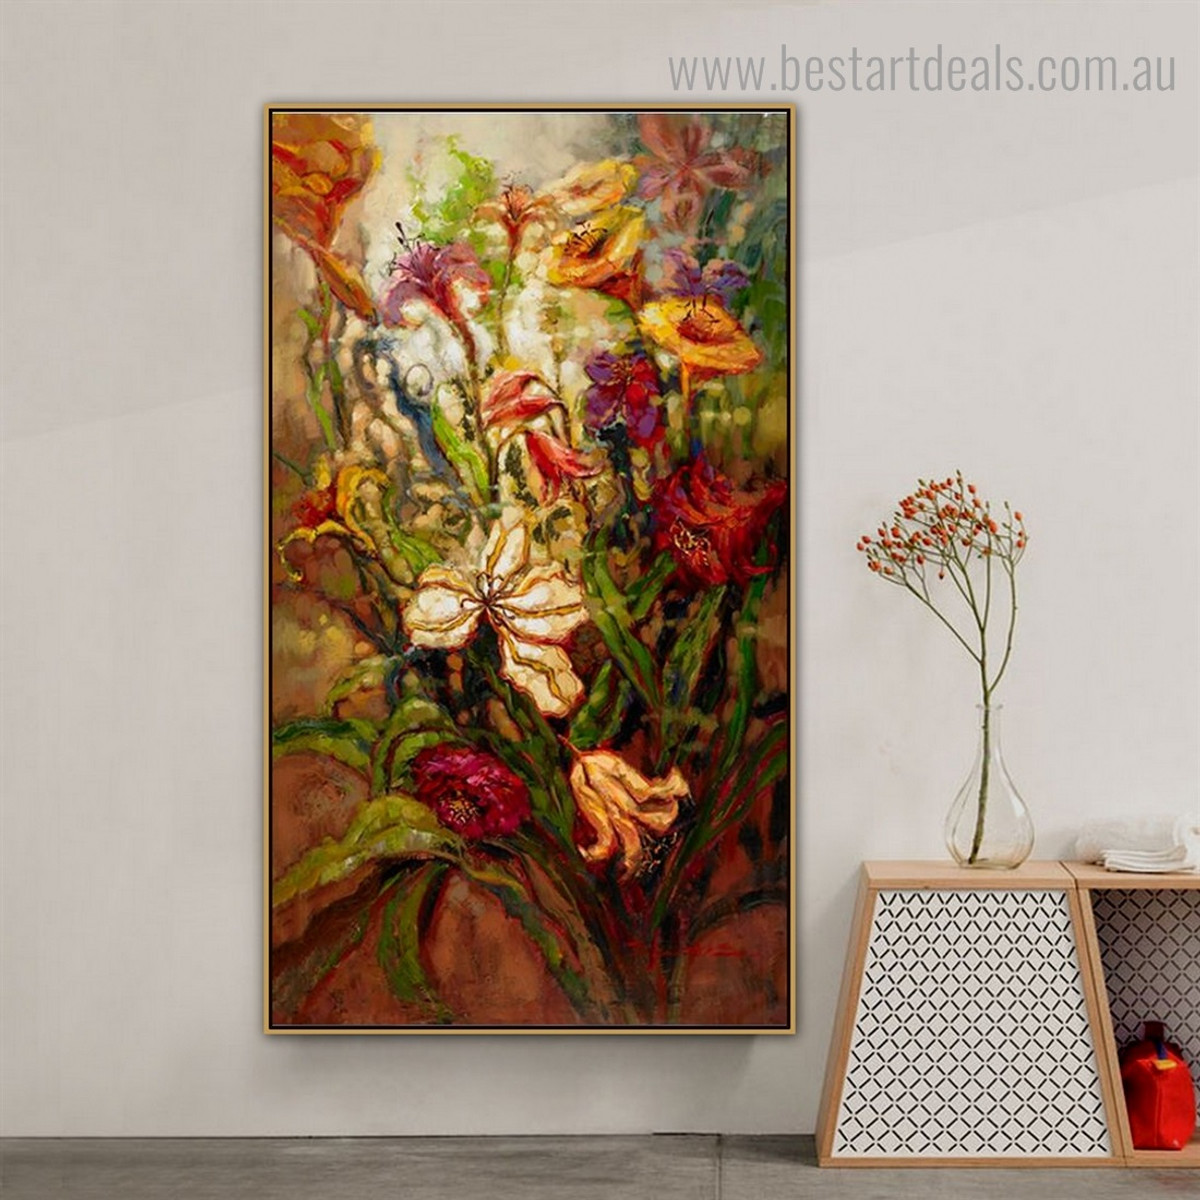 Varicolored Blooms Abstract Impressionist Framed Painting Photo Canvas Print for Room Wall Decor